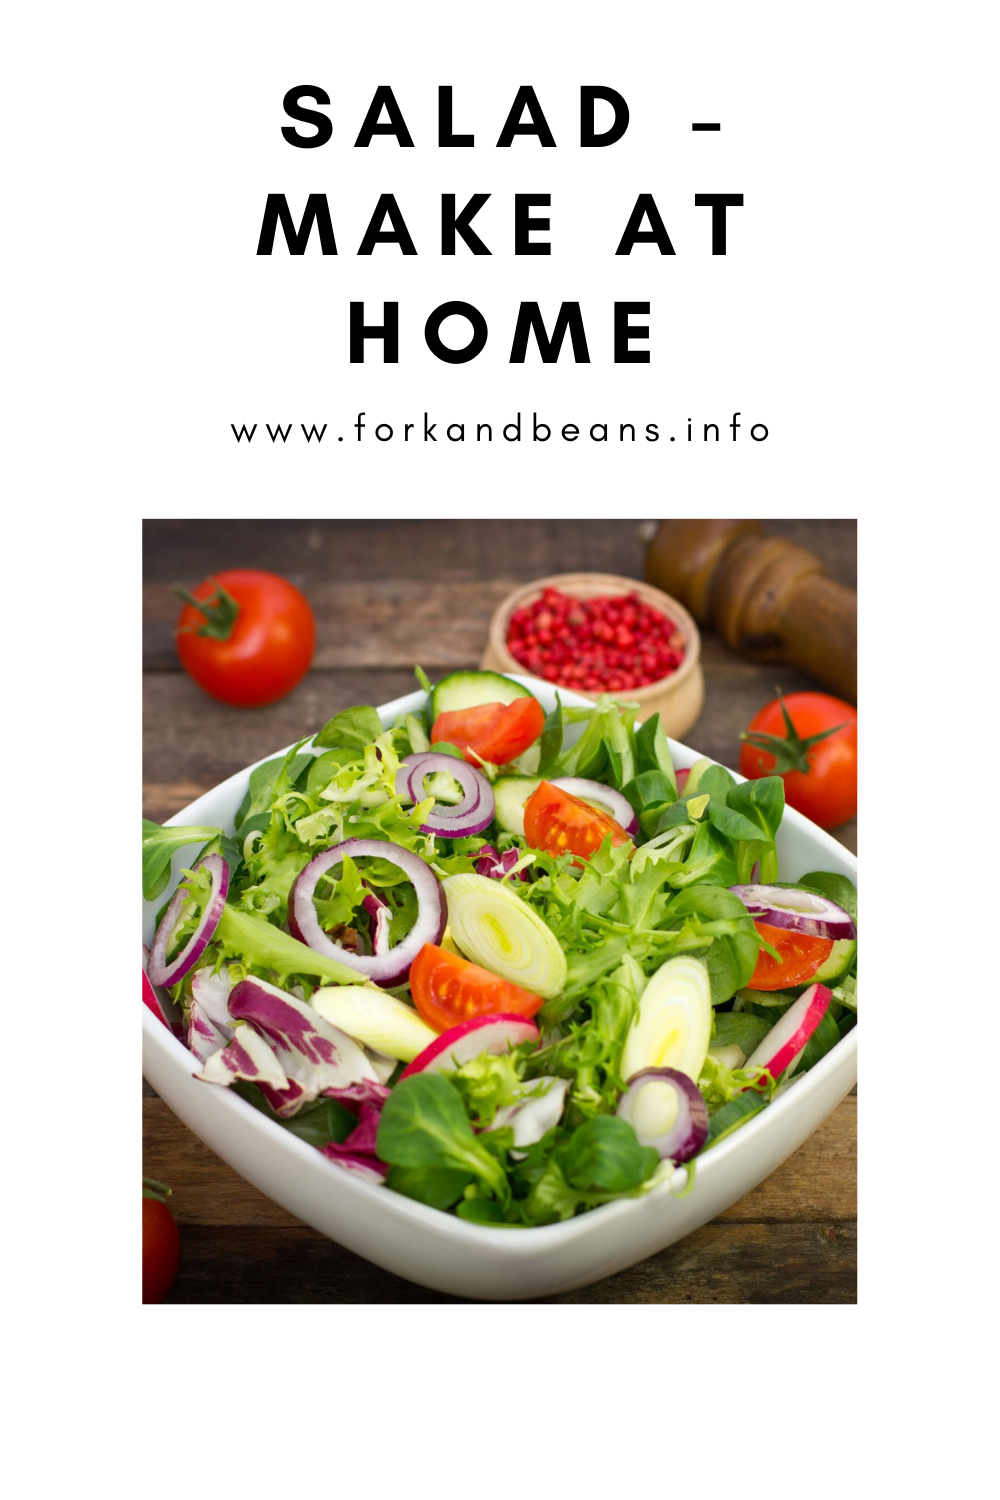 How To Make A Salad At Home: Good Food For A Good Life